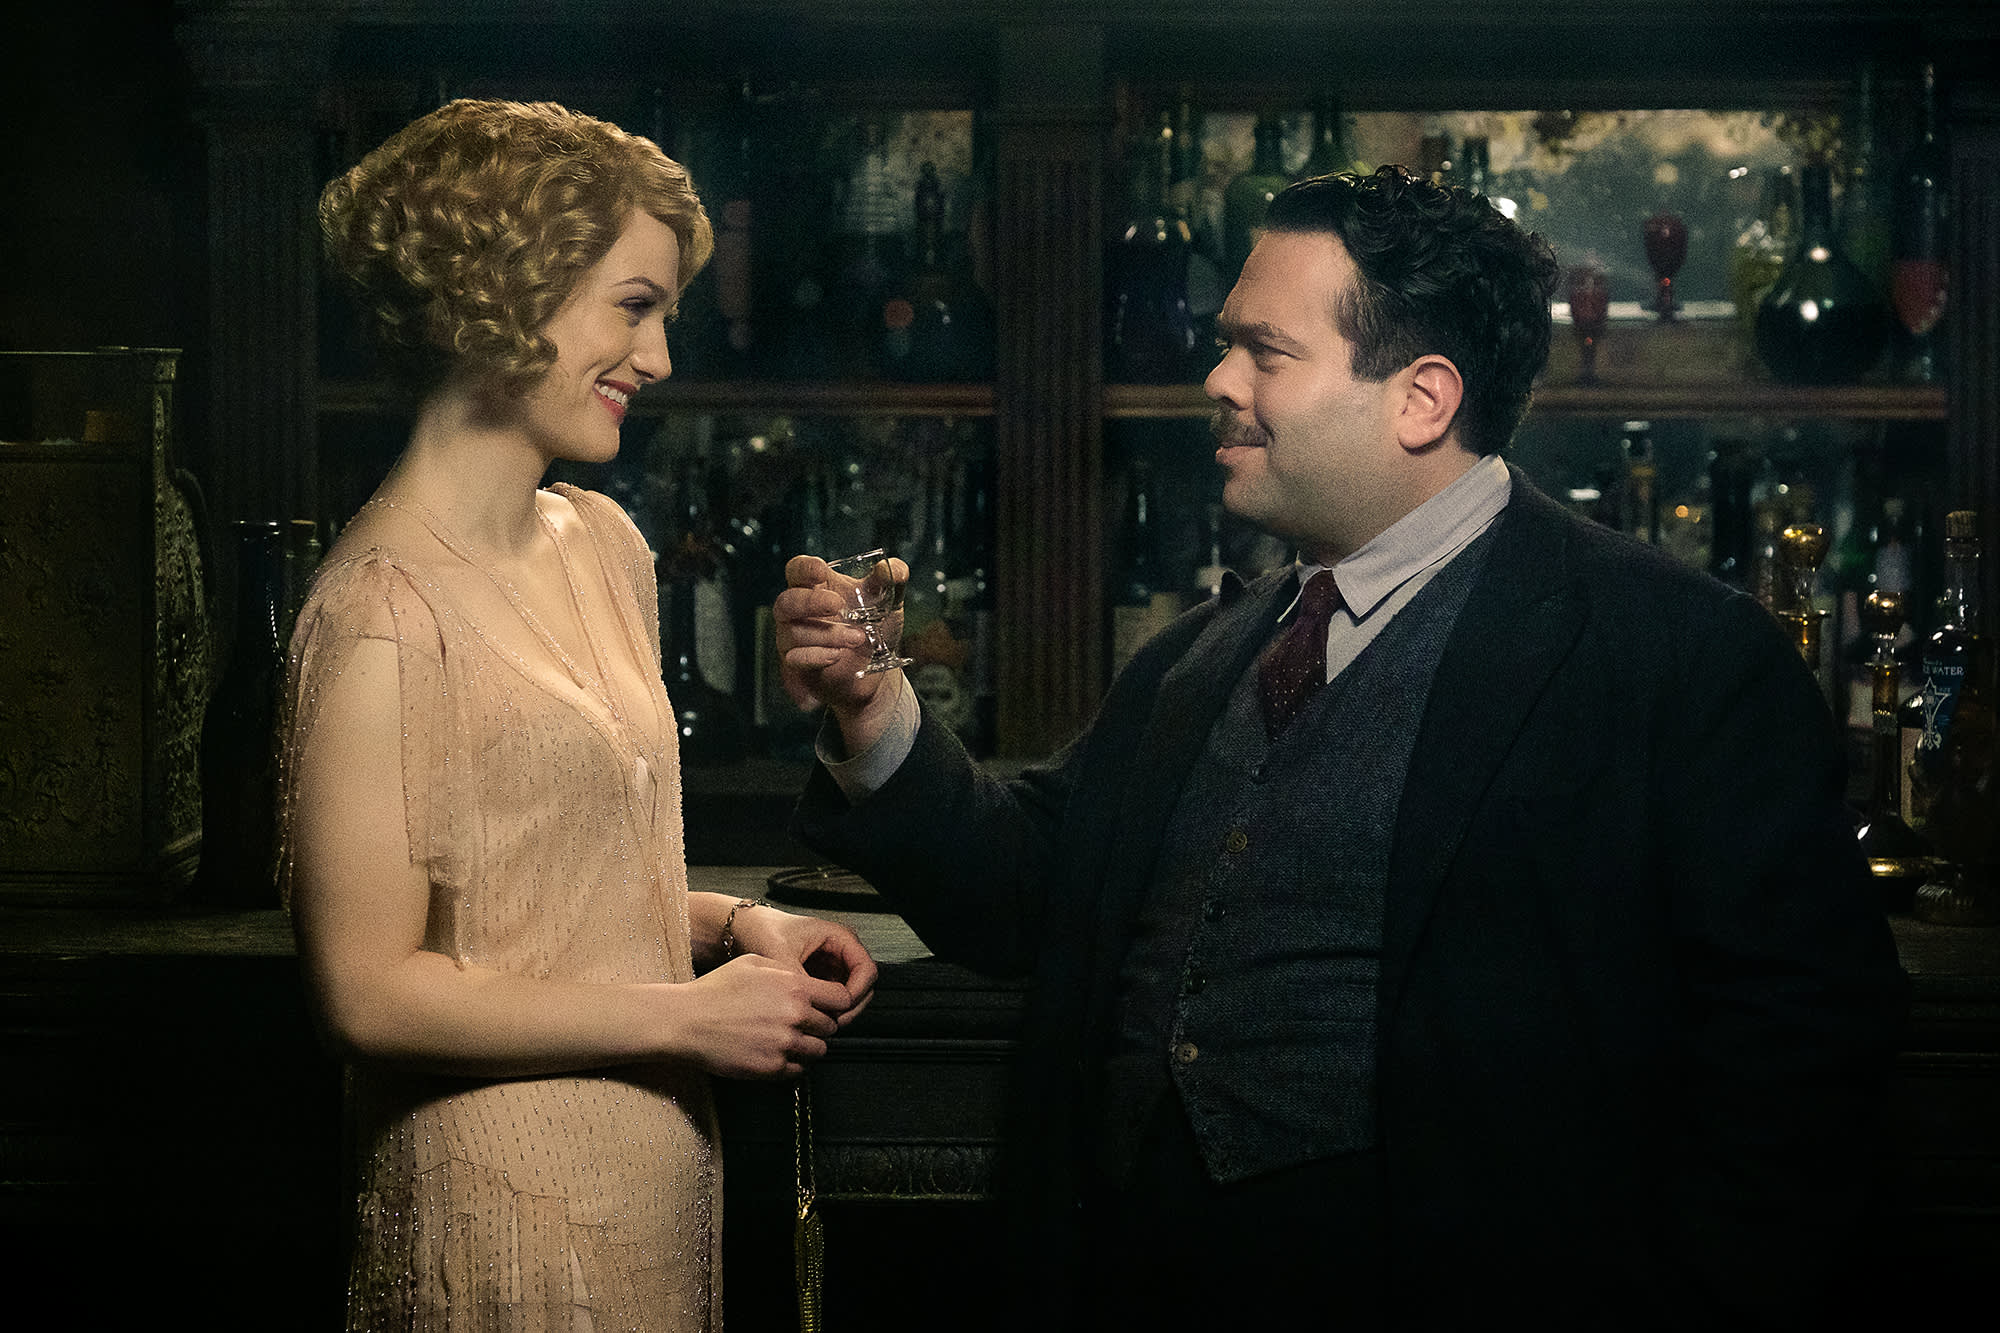 Jacob and Queenie standing at the bar of The Blind Pig looking at each other and smiling. Jacob is holding a glass of Gigglewater.